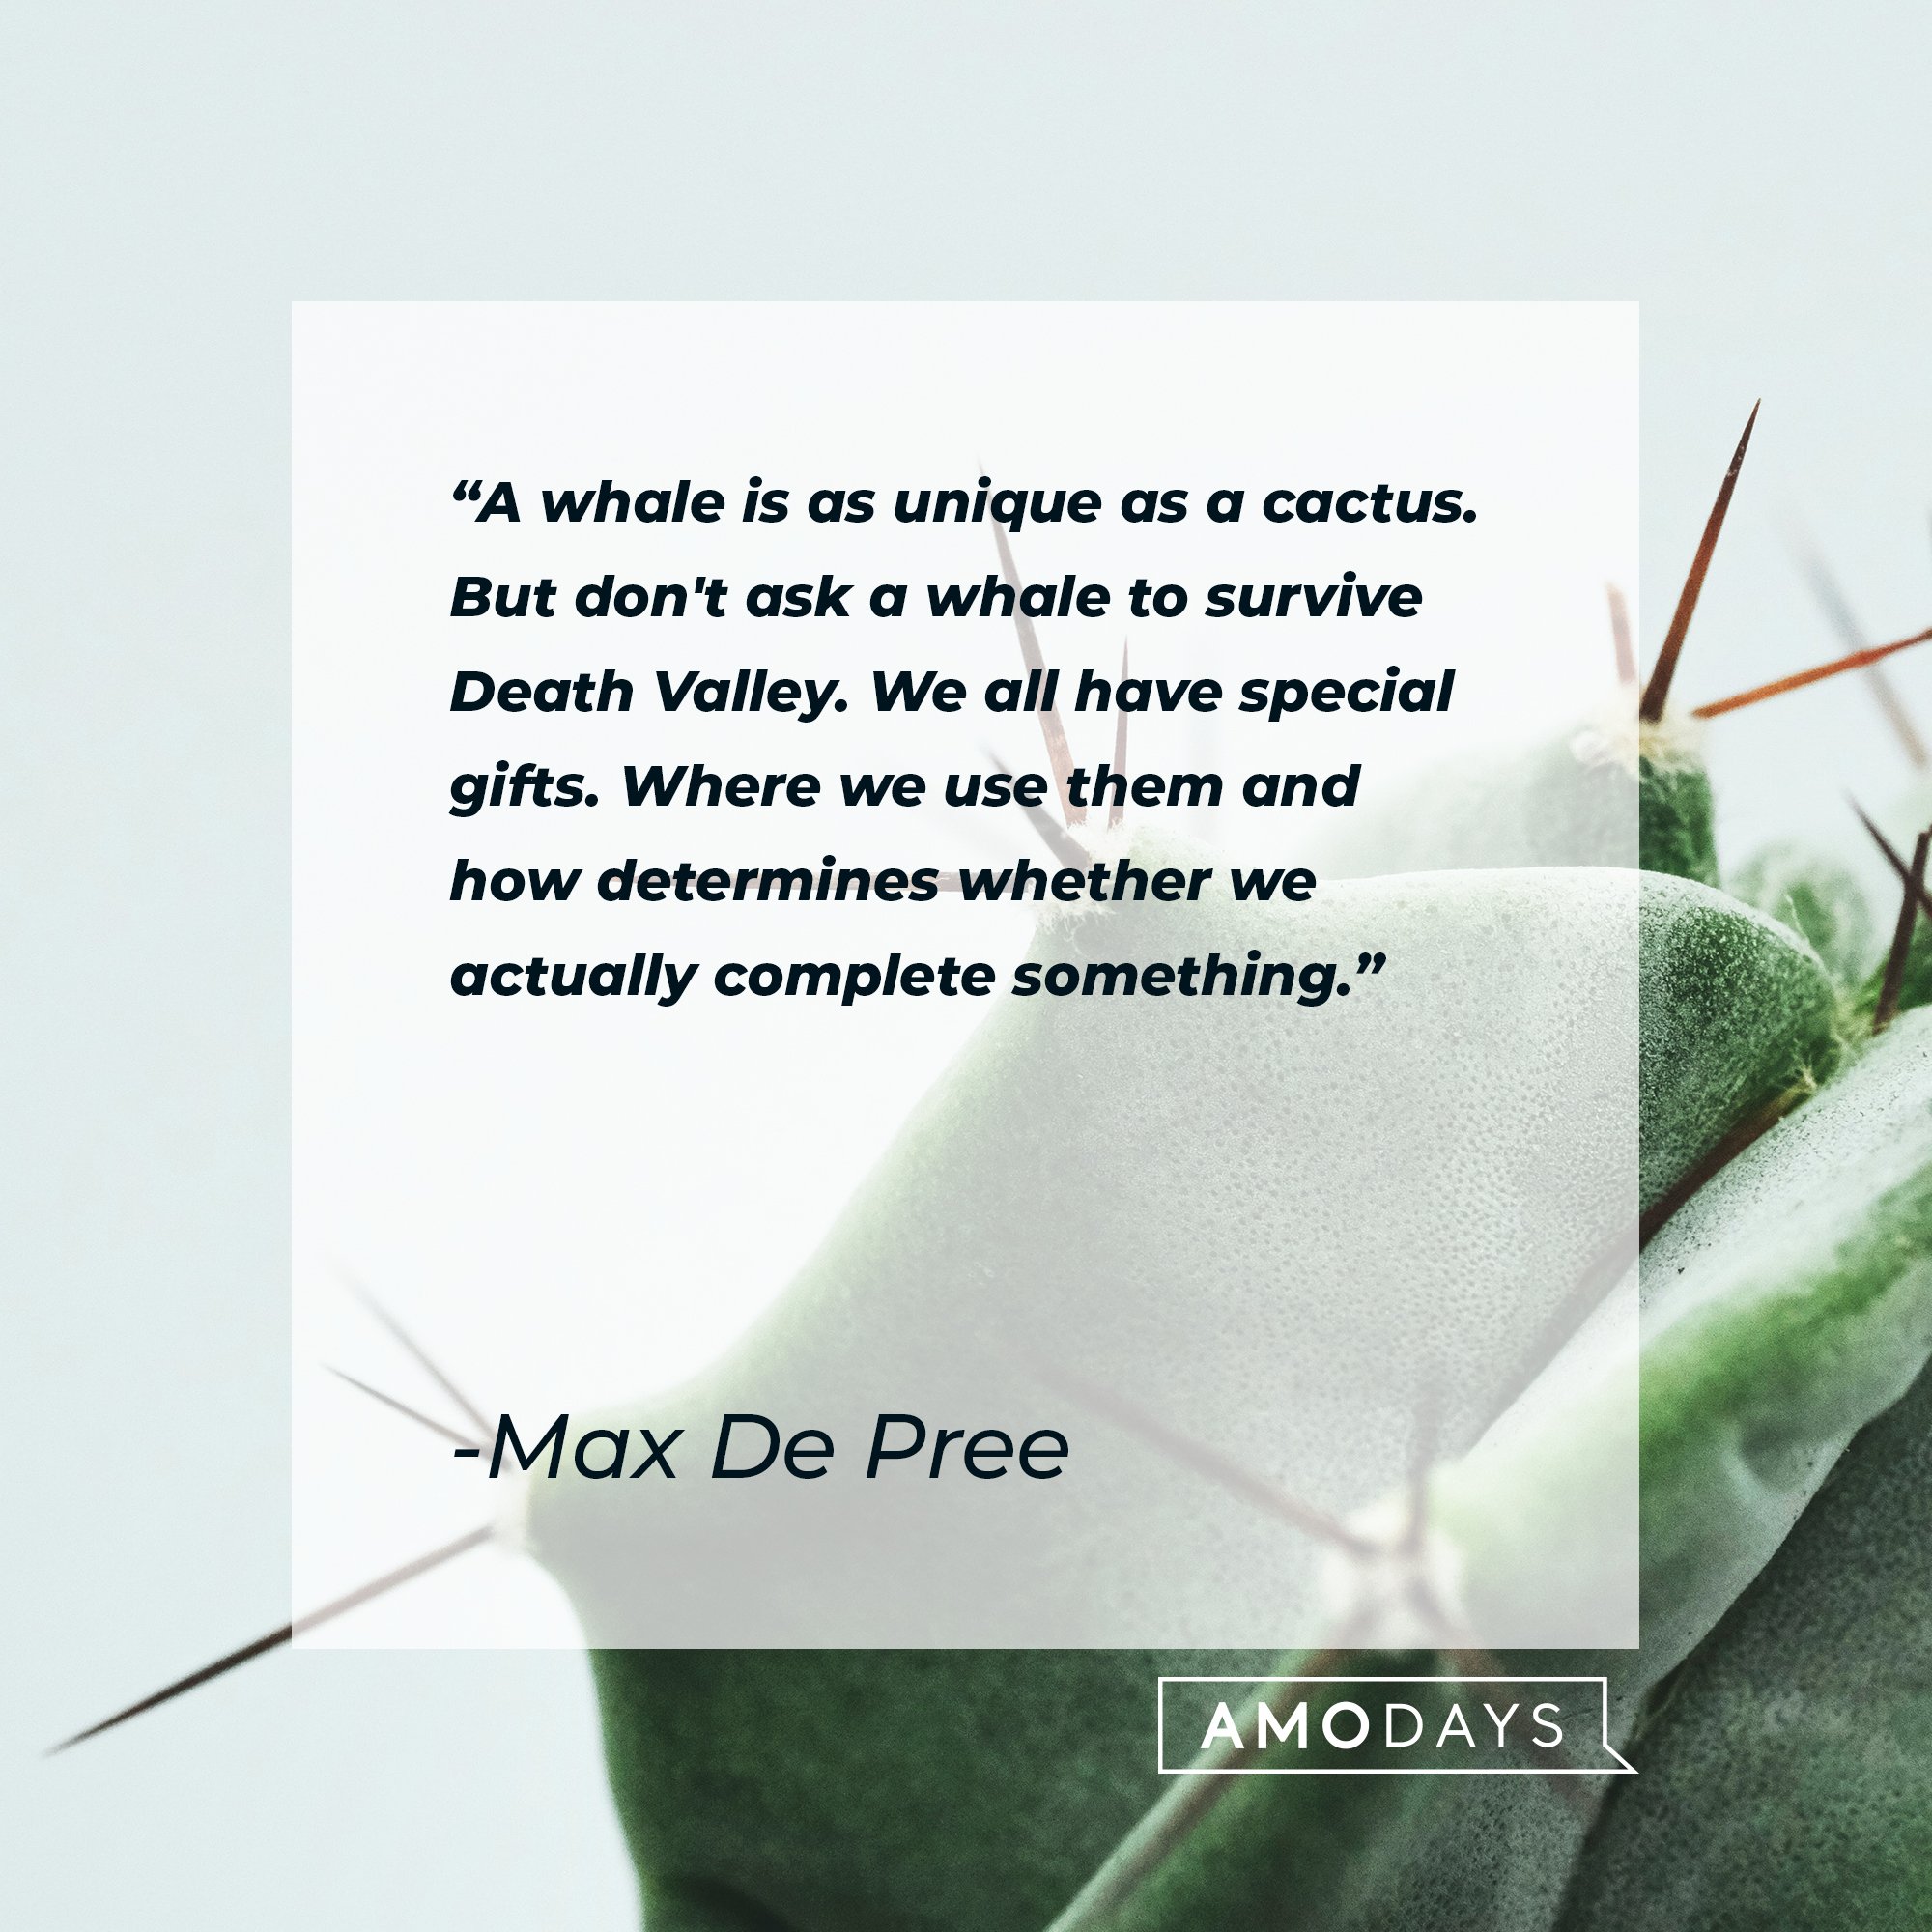  Max De Pree’s quote: "A whale is as unique as a cactus. But don't ask a whale to survive Death Valley. We all have special gifts. Where we use them and how determines whether we actually complete something.” | Image: AmoDays